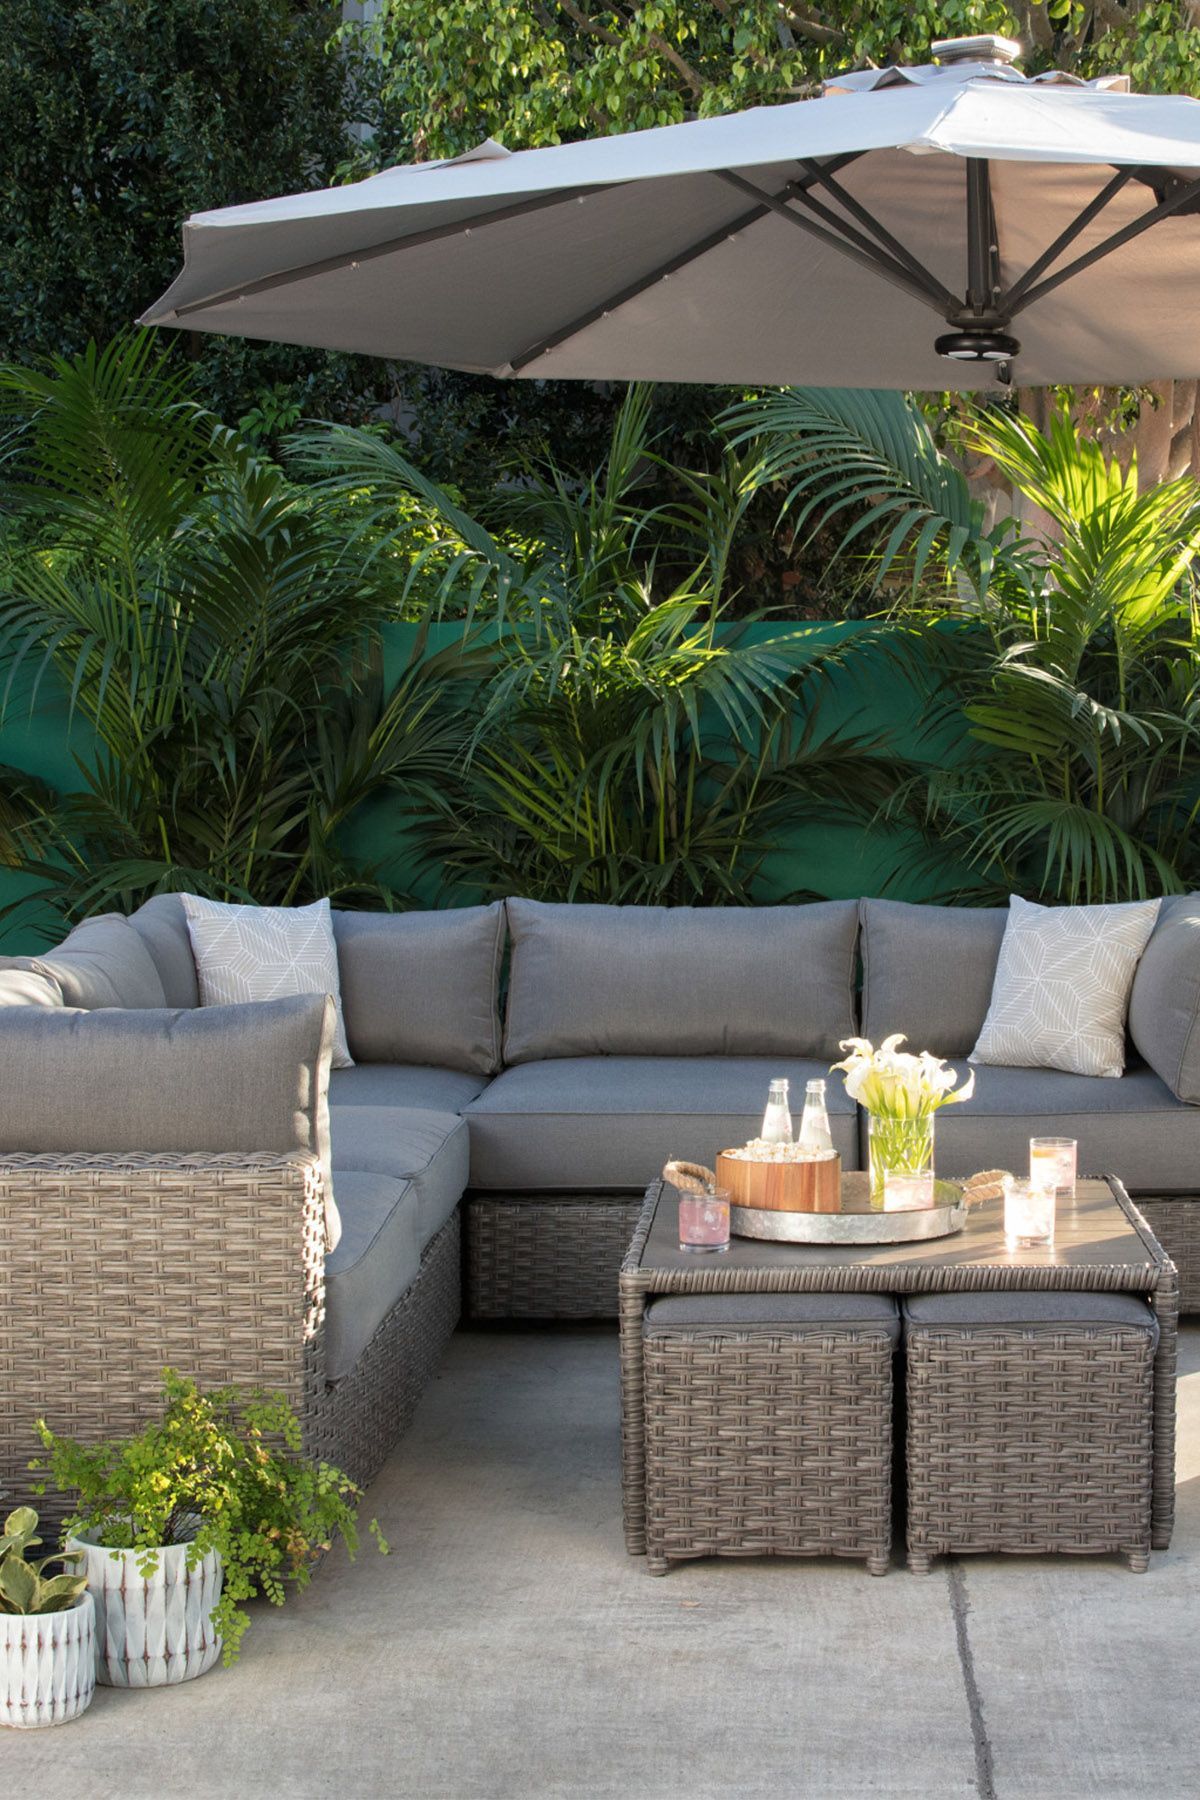 Our Koro Outdoor Sectional Brings Variety, Durability And Modularity With Outdoor Koro Swivel Chairs (View 7 of 25)